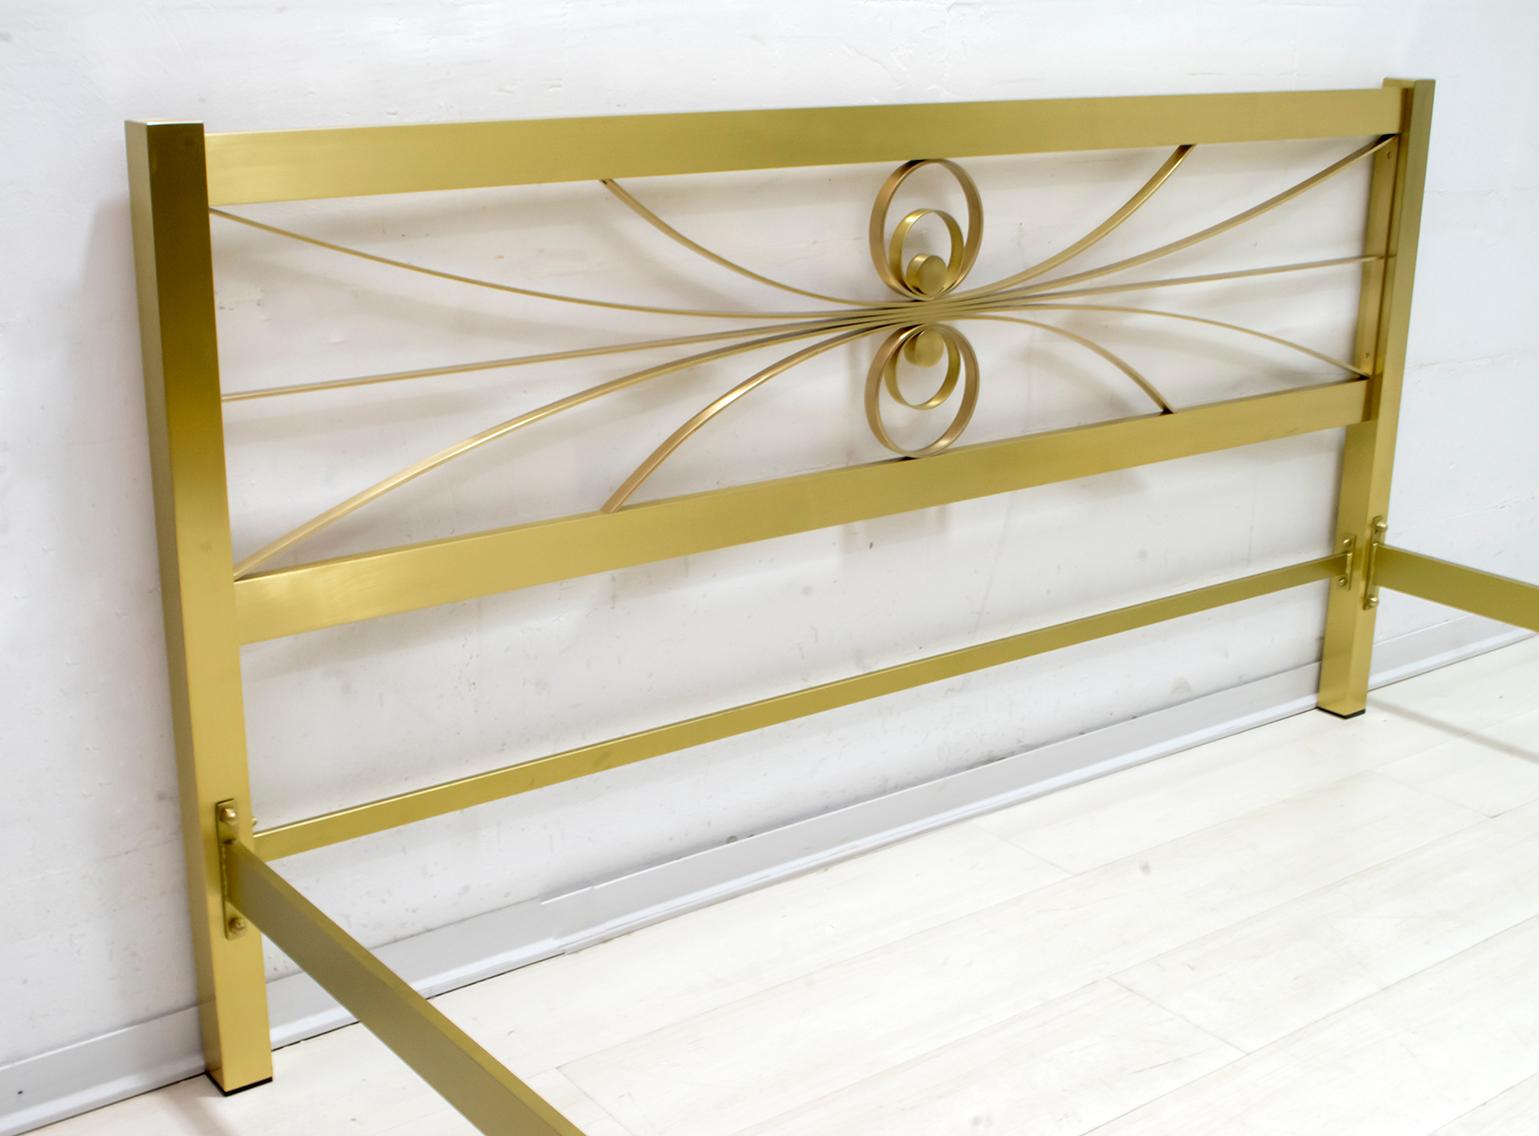 Elegant double bed designed by Luciano Frigerio, Italy, 1970s, in good original condition, bed kept in a warehouse of a furniture factory. The decorative section includes metal crosspieces with a gold finish.